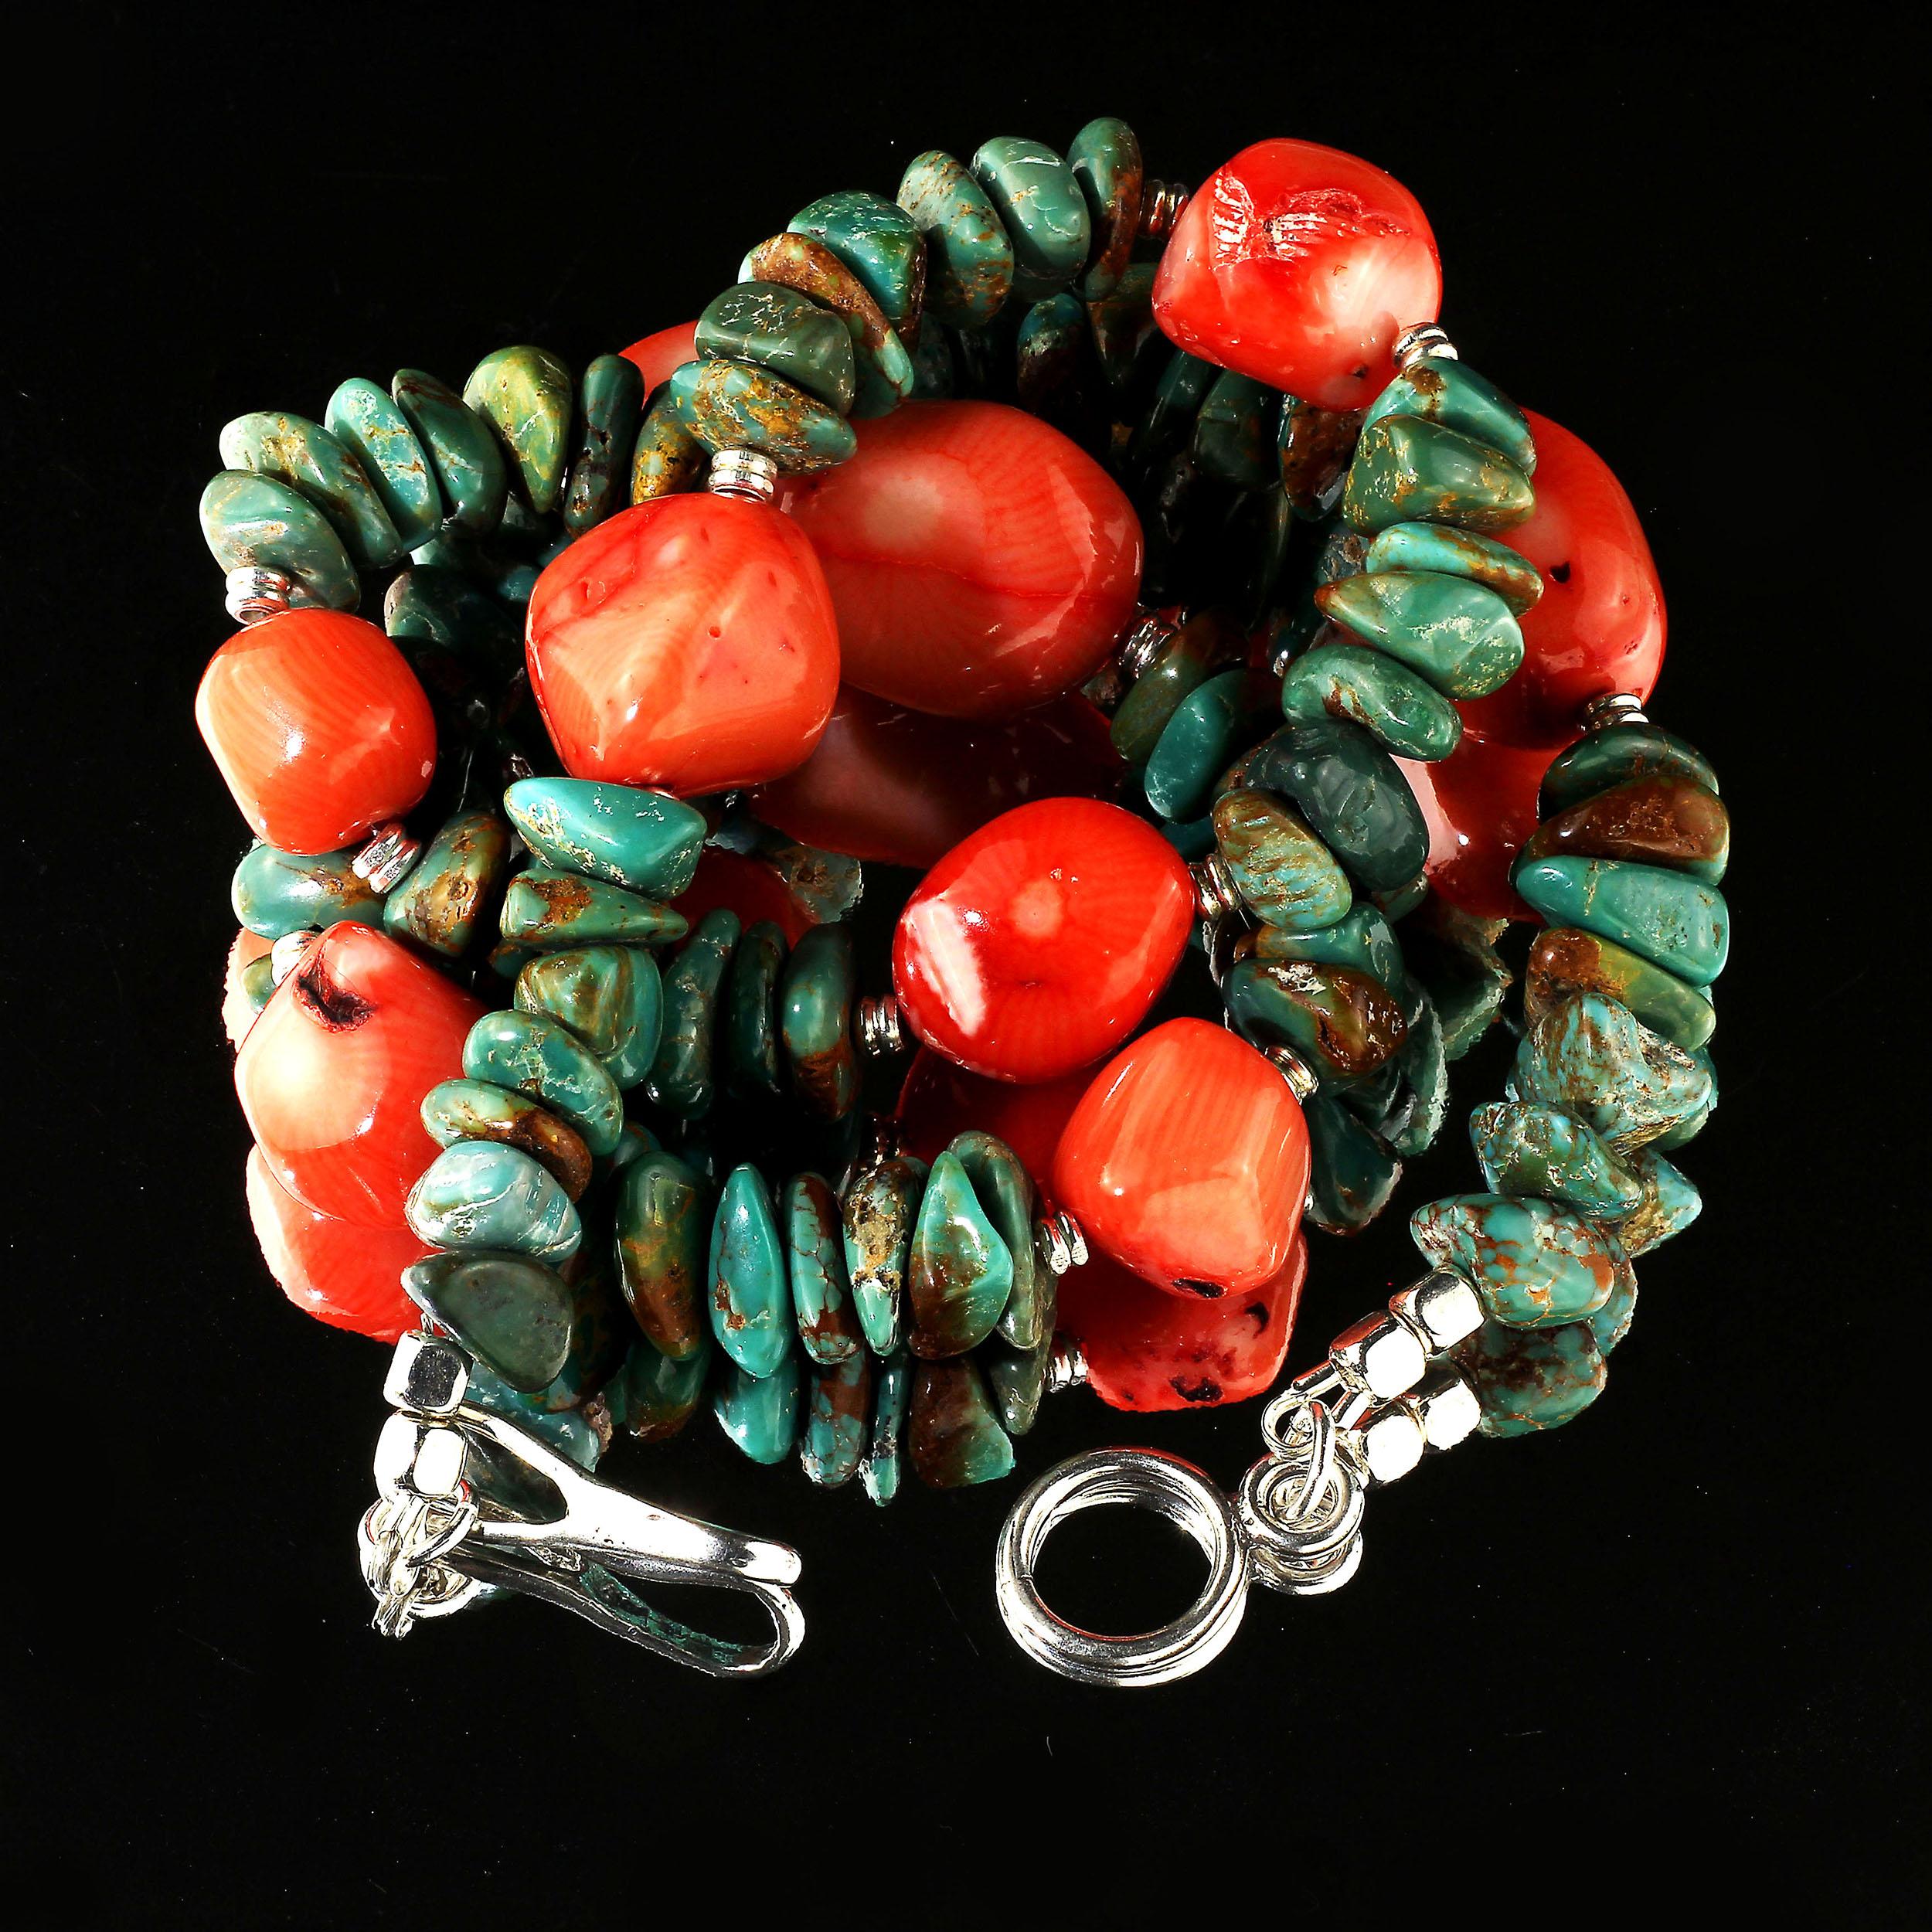 Wear this great looking Turquoise and highly polished Coral nugget necklace with jeans and tee or cocktail dresses. It's fun and funky. 19 inches and Sterling Silver hook and eye clasp. The peach tone of the bamboo Coral is perfect for Summer and